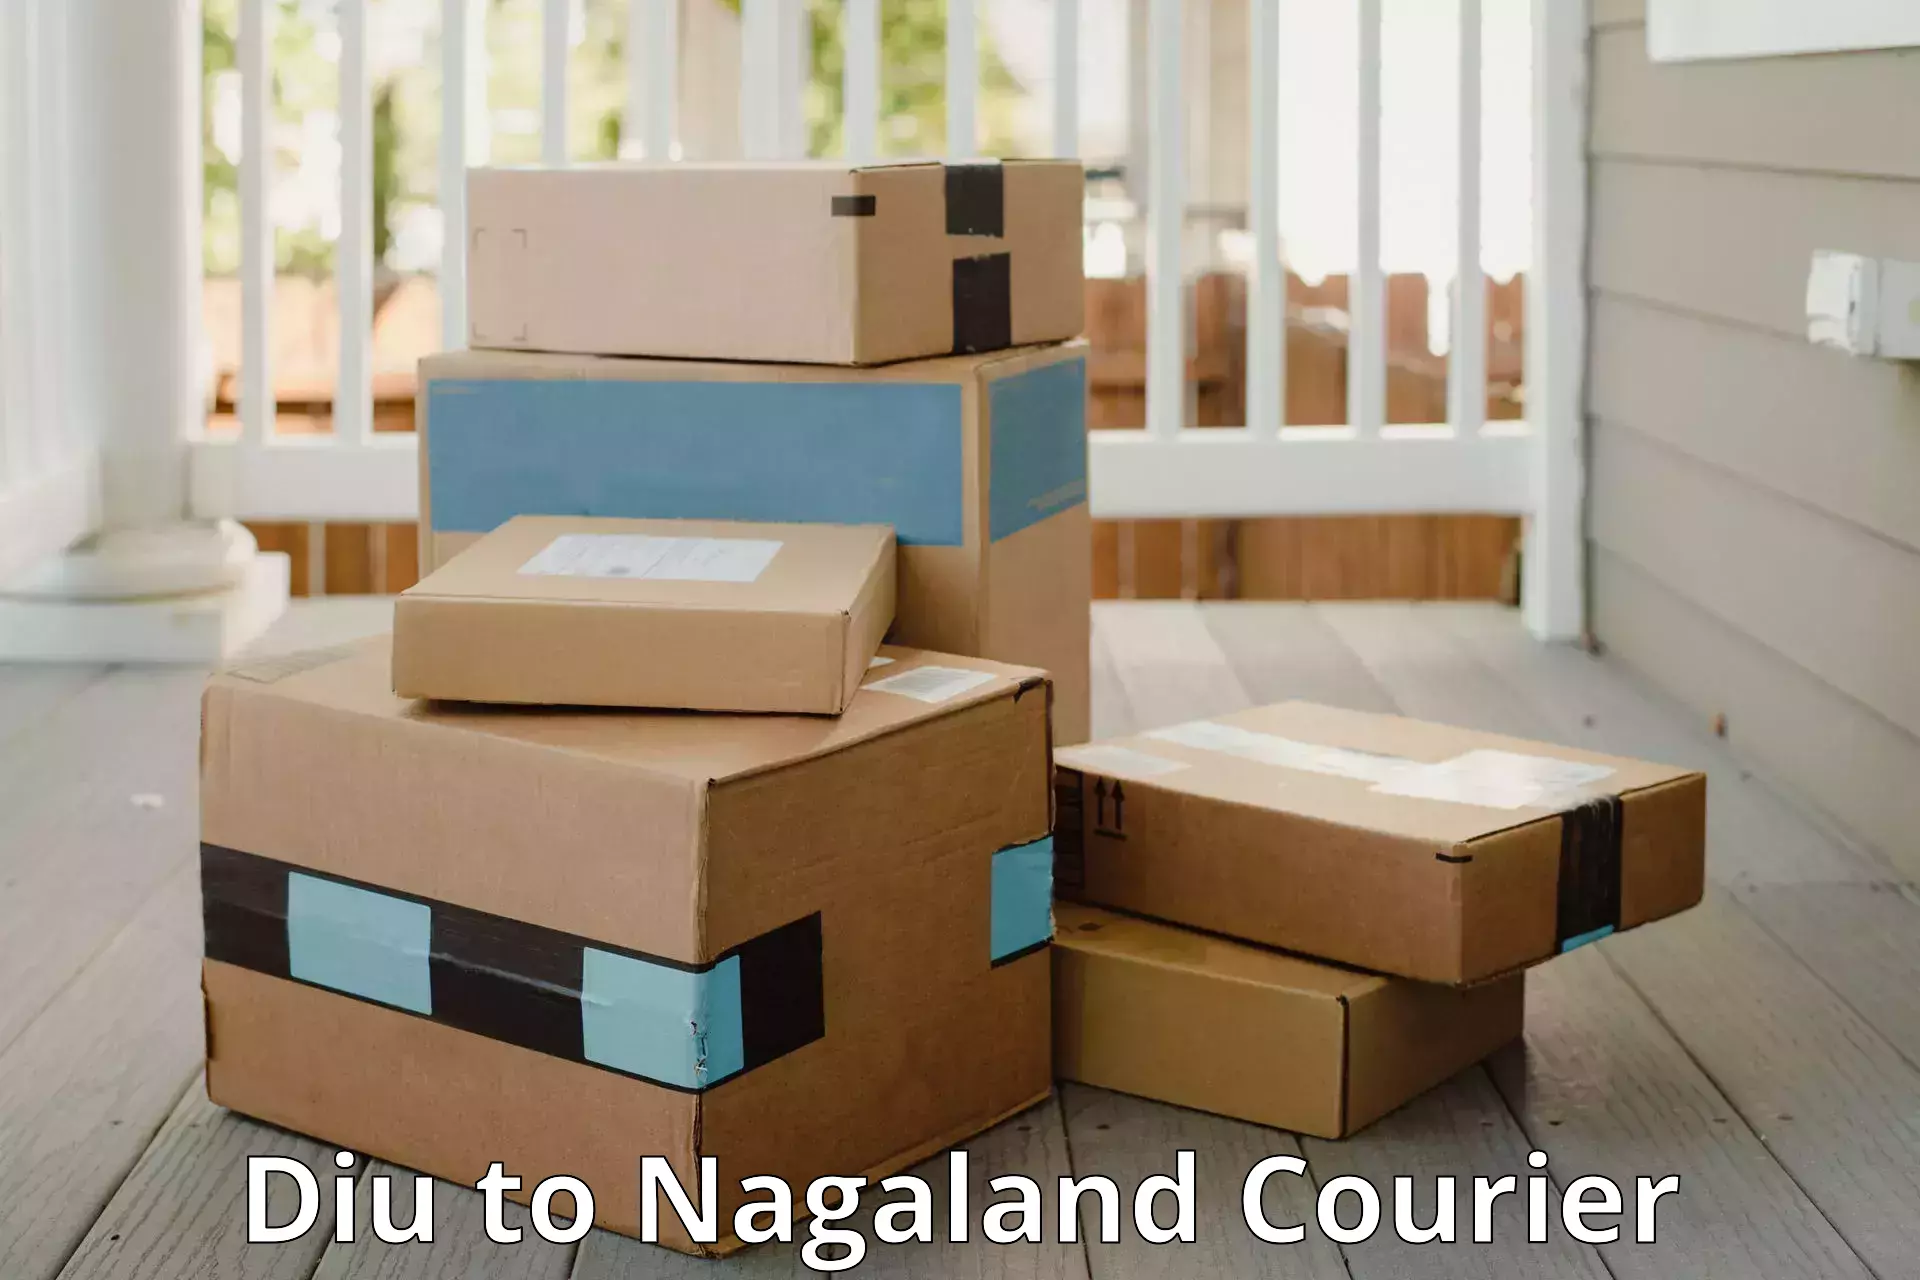 Luggage transport consulting Diu to Nagaland